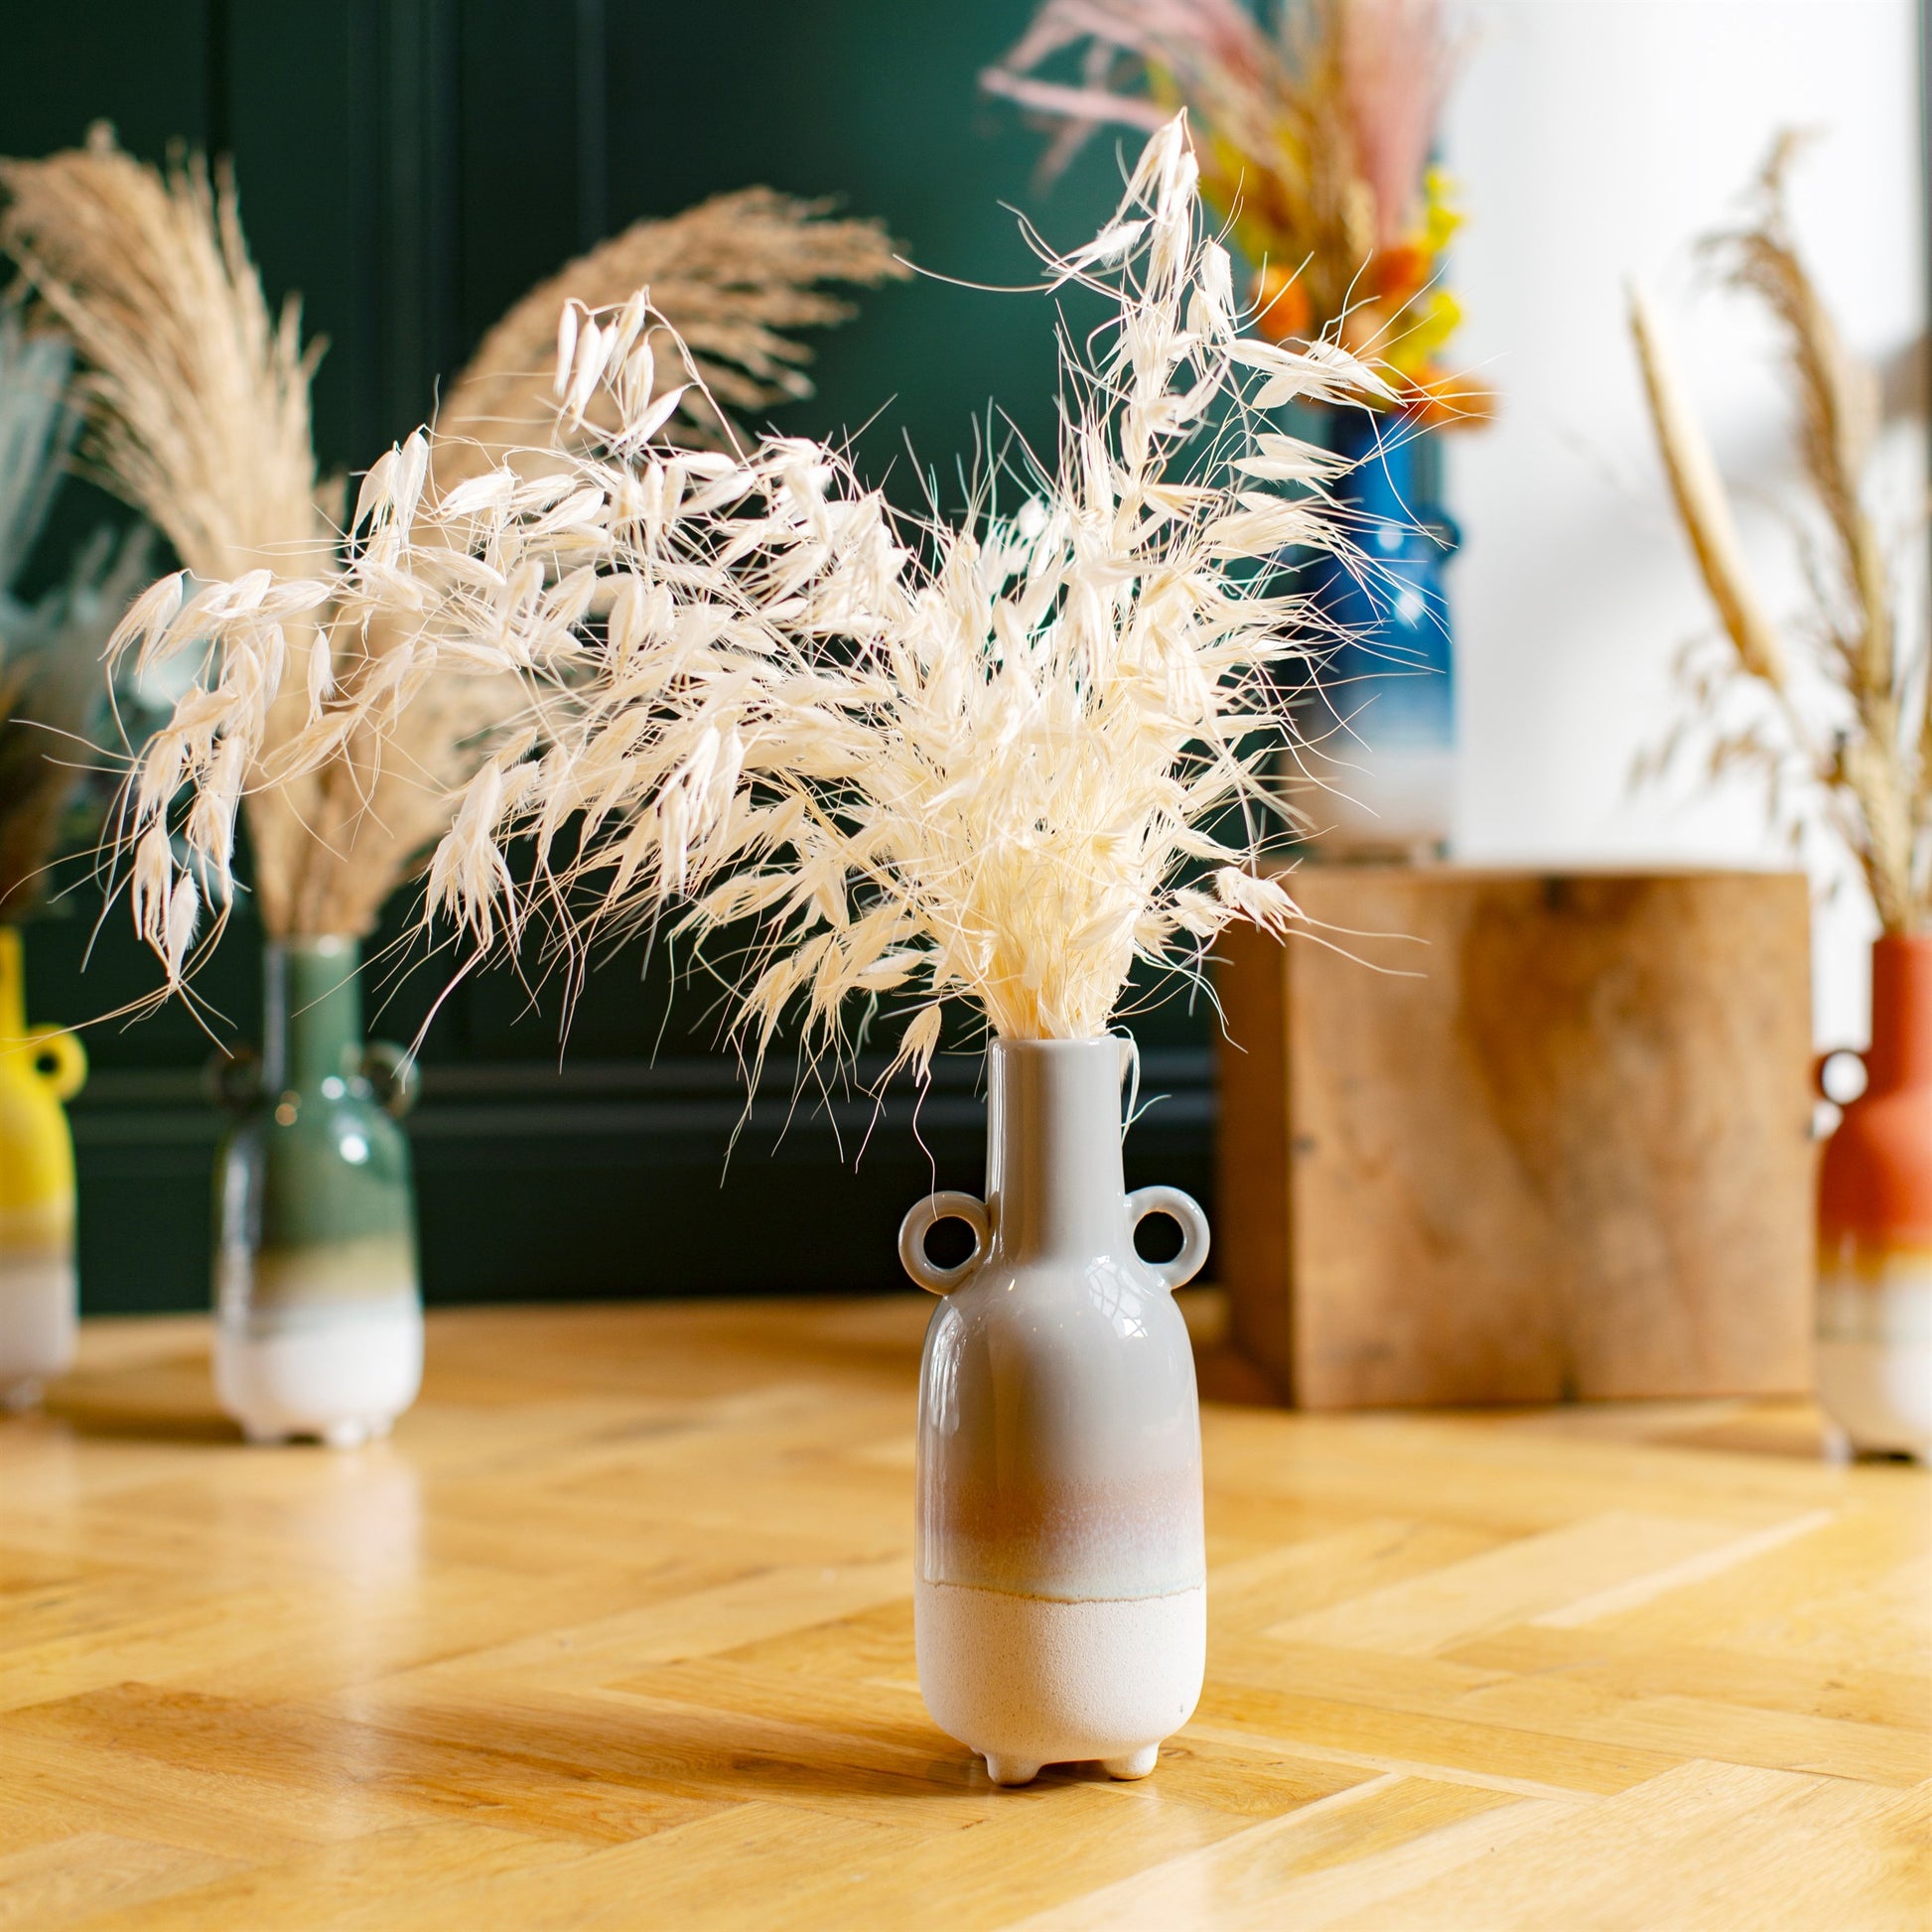 Grey Ombre Vase with dried flowers in a lifestyle image